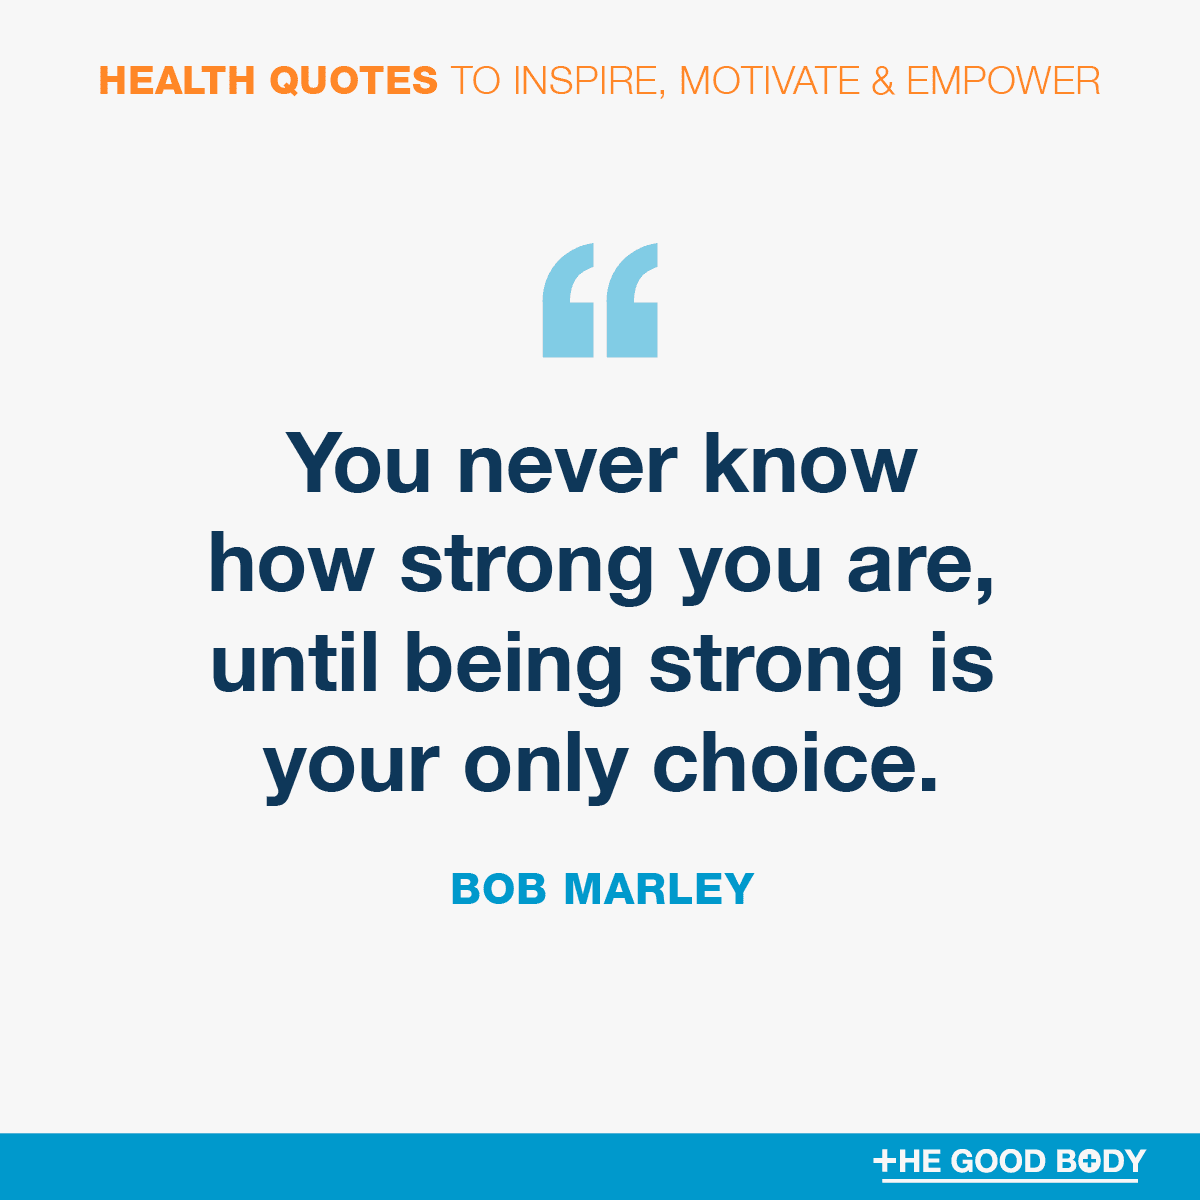 Motivational Mental Health Quotes #3 by Bob Marley